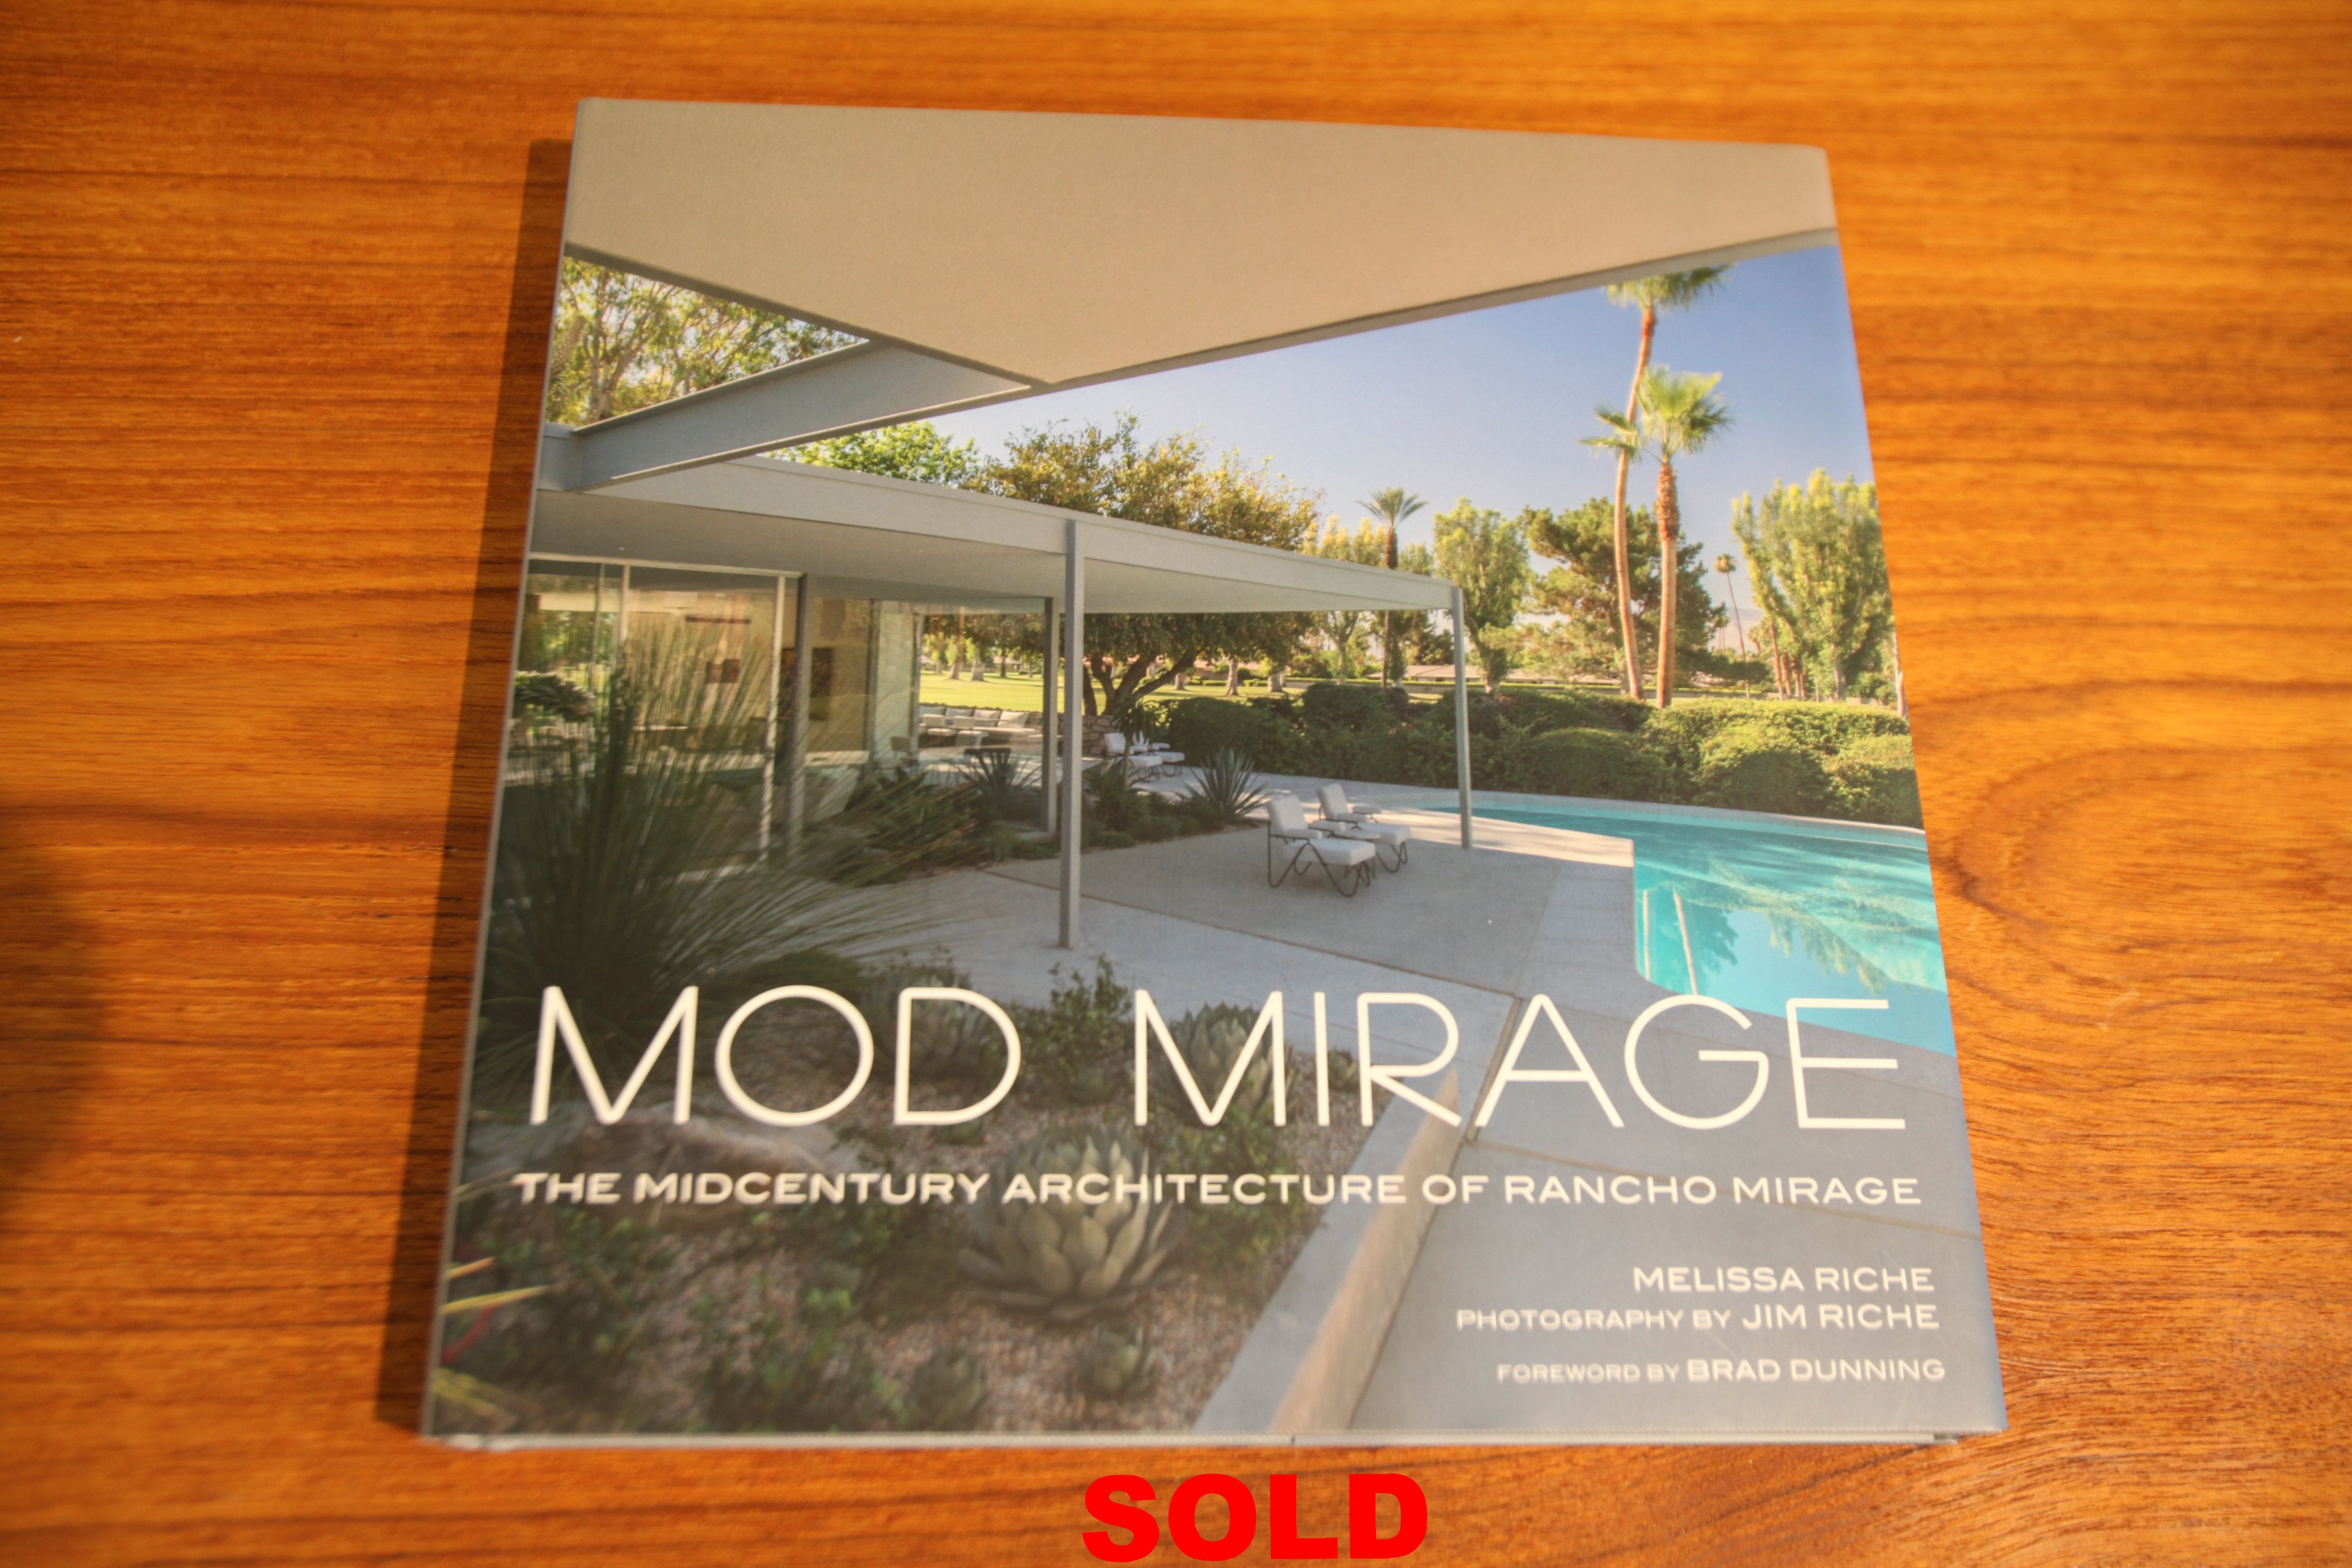 Mod Mirage "The midcentury architecture of Rancho Mirage" BOOK